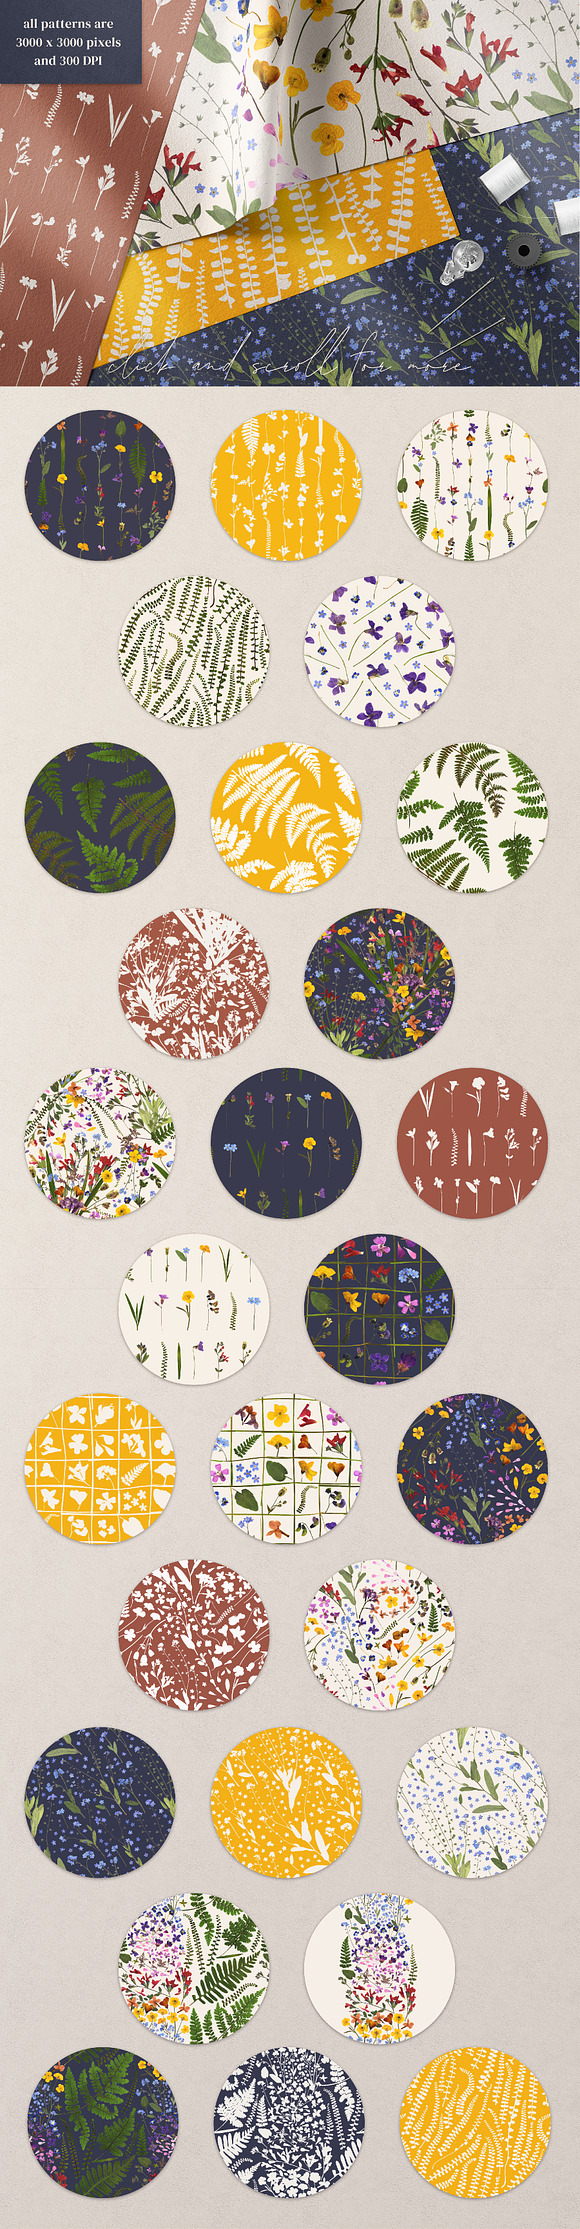 Herbarium vol. 2: Wild Spring in Illustrations - product preview 8